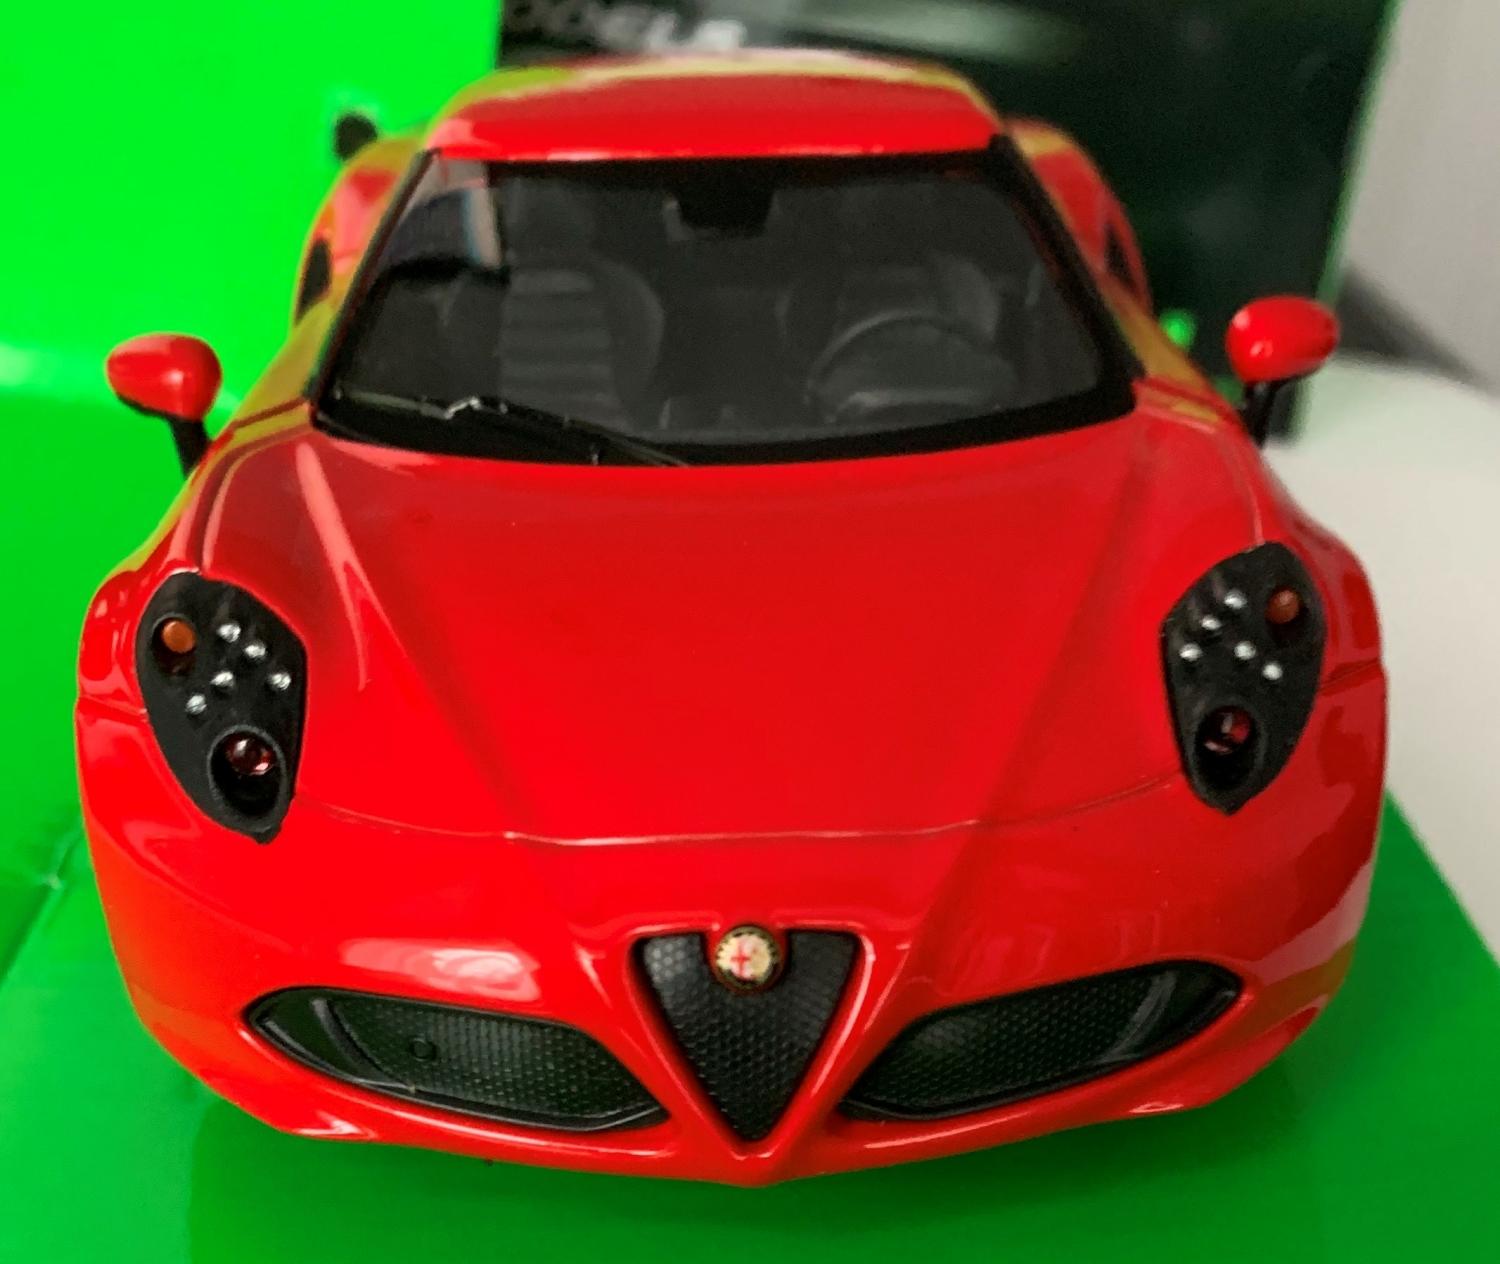 Alfa Romeo 4C in red 1:24 scale model from Welly